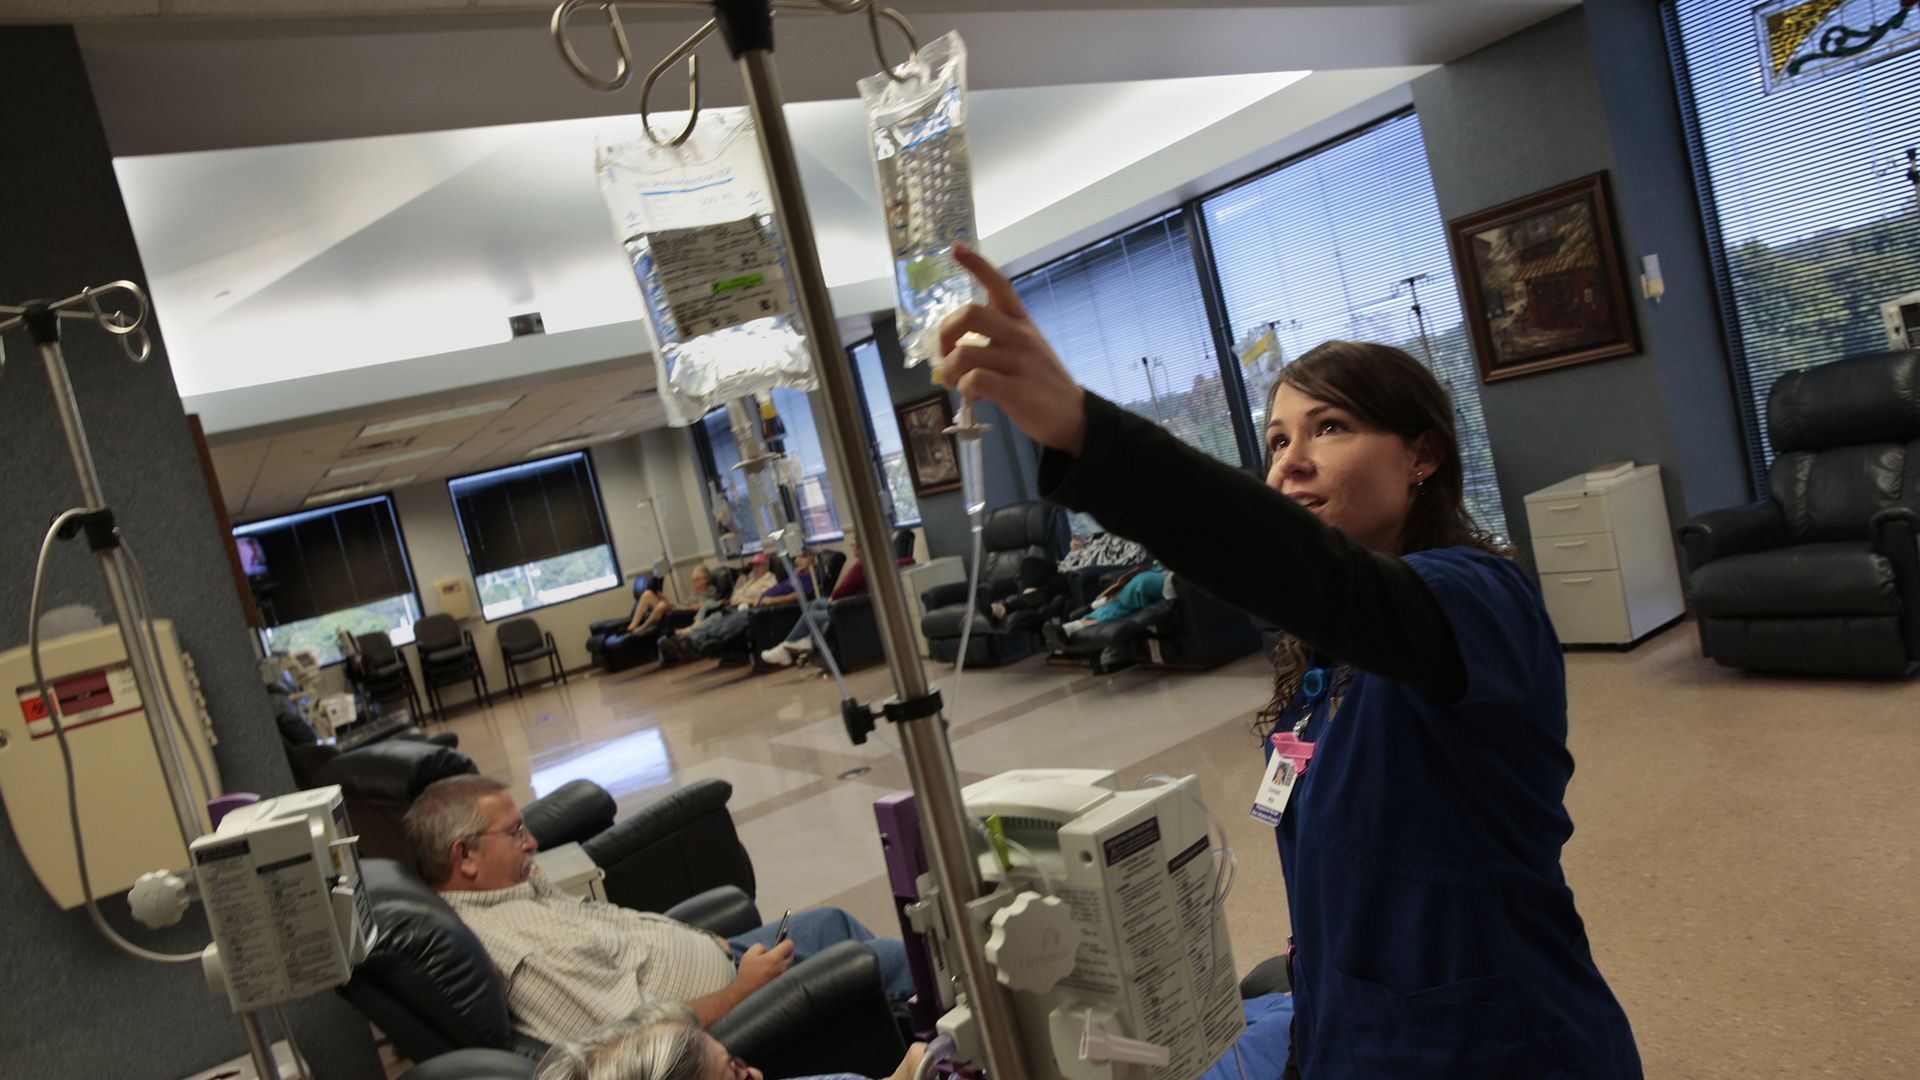 A nurse works in a hospital's oncology infusion center.